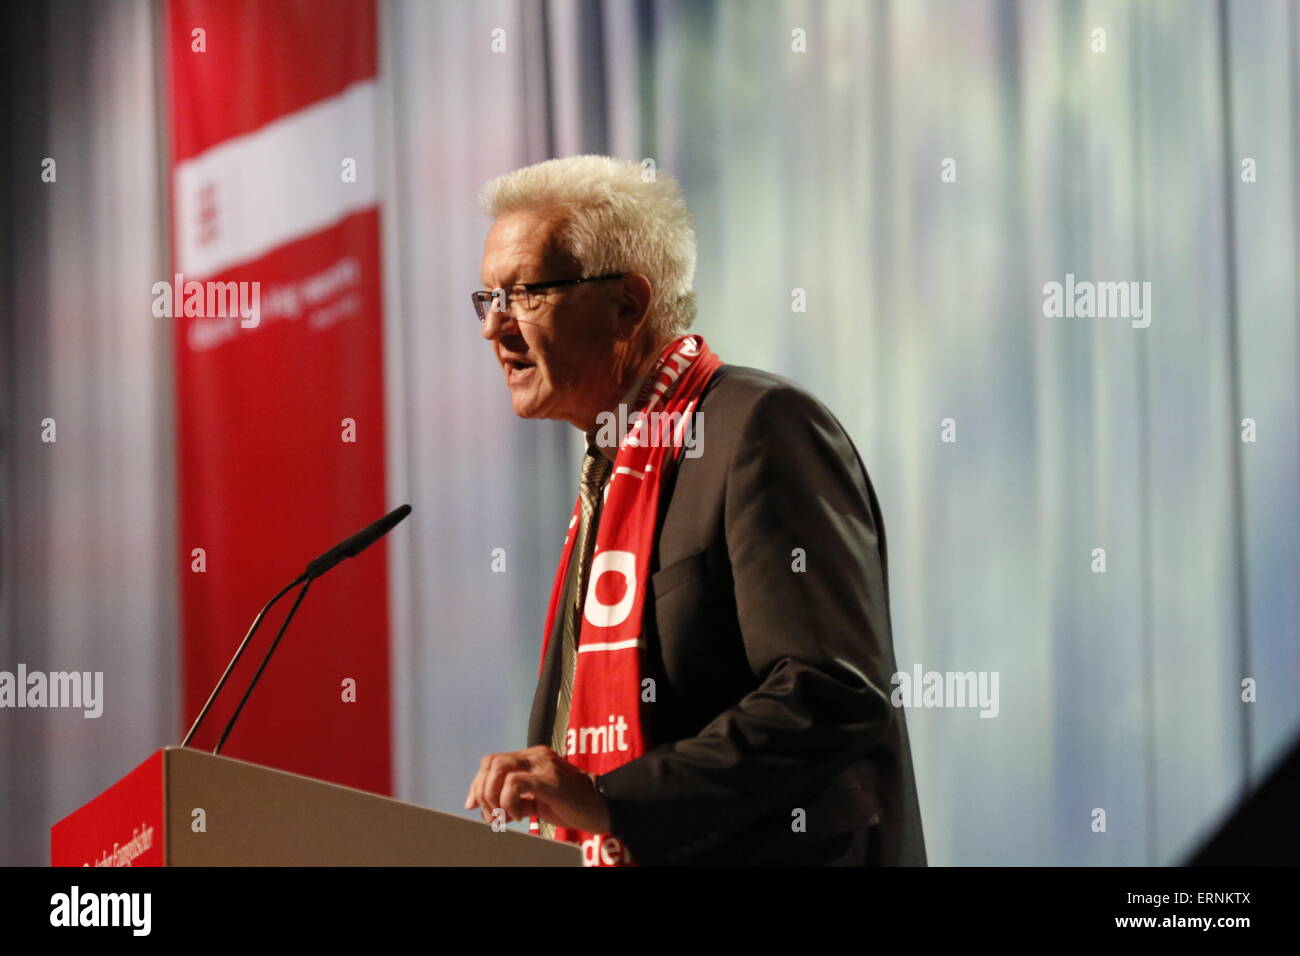 Stuttgart, Germany. 05th June, 2015. Winfried Kretschmann, the Minister-President of Baden-Württemberg, gives a Bible study at the 35th German Protestant Church Congress. The third day of the 35th Protestant Church Congress started with bible studies and political discussions. Music and events for children played an important part as well. Credit:  Michael Debets/Pacific Press/Alamy Live News Stock Photo